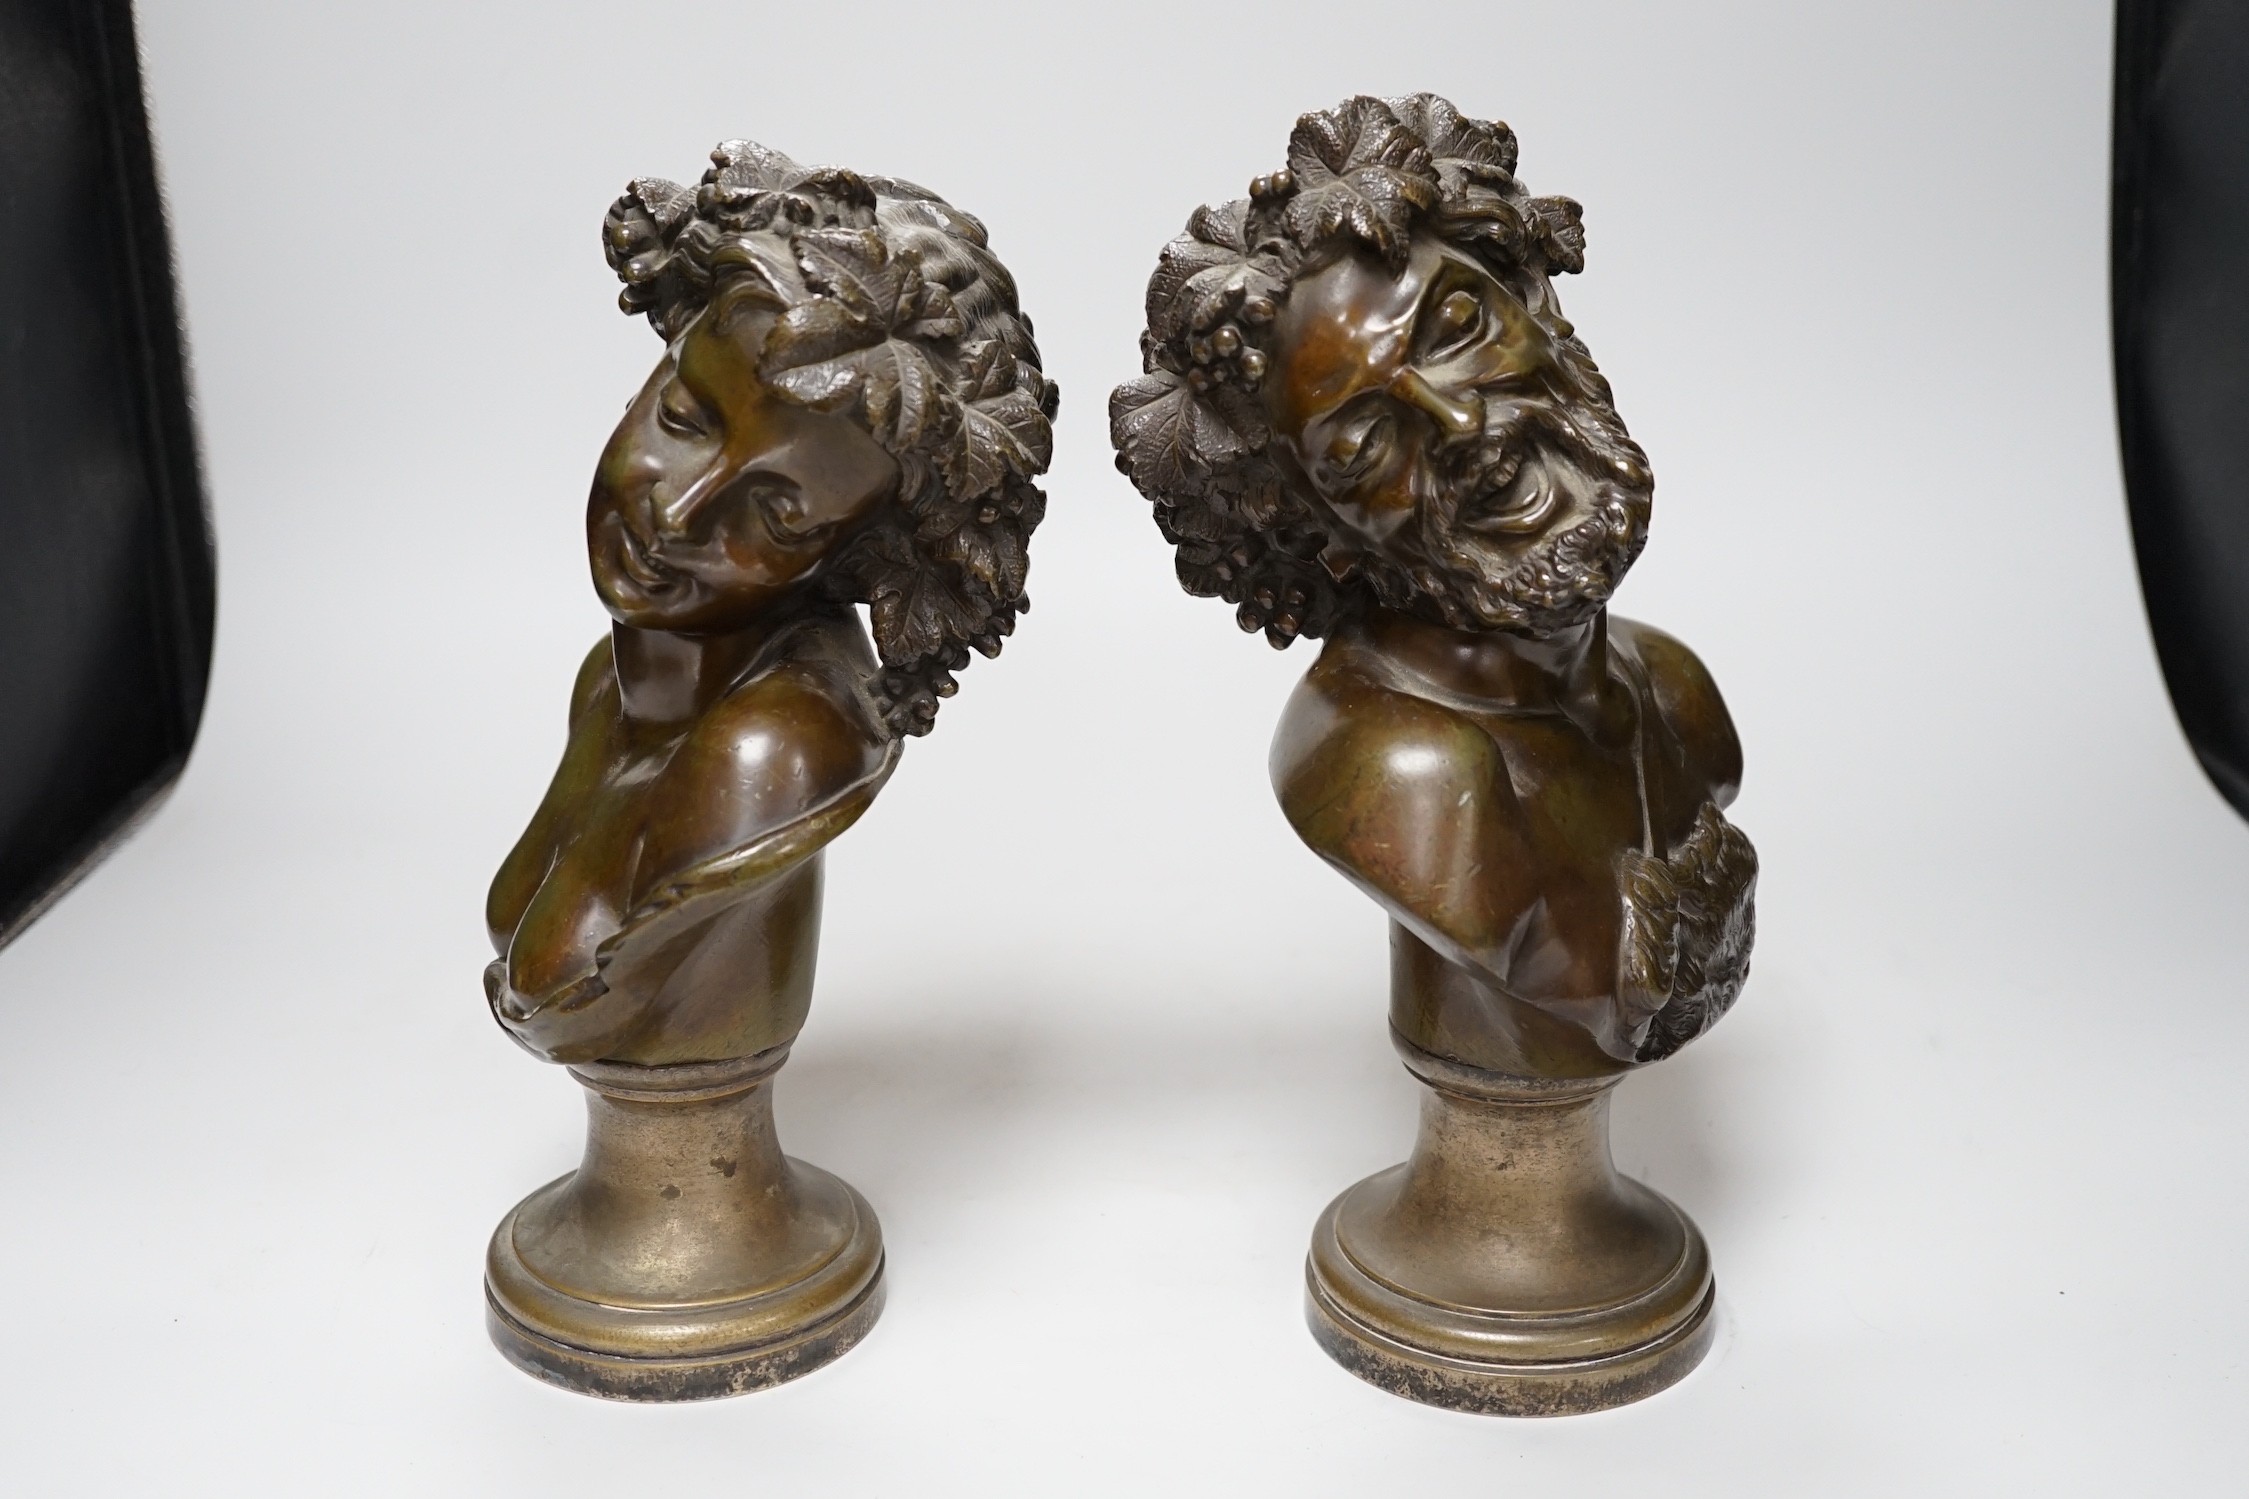 A pair of late 19th century French bronze Bacchic busts, on plated socles, 28cm - Image 2 of 3